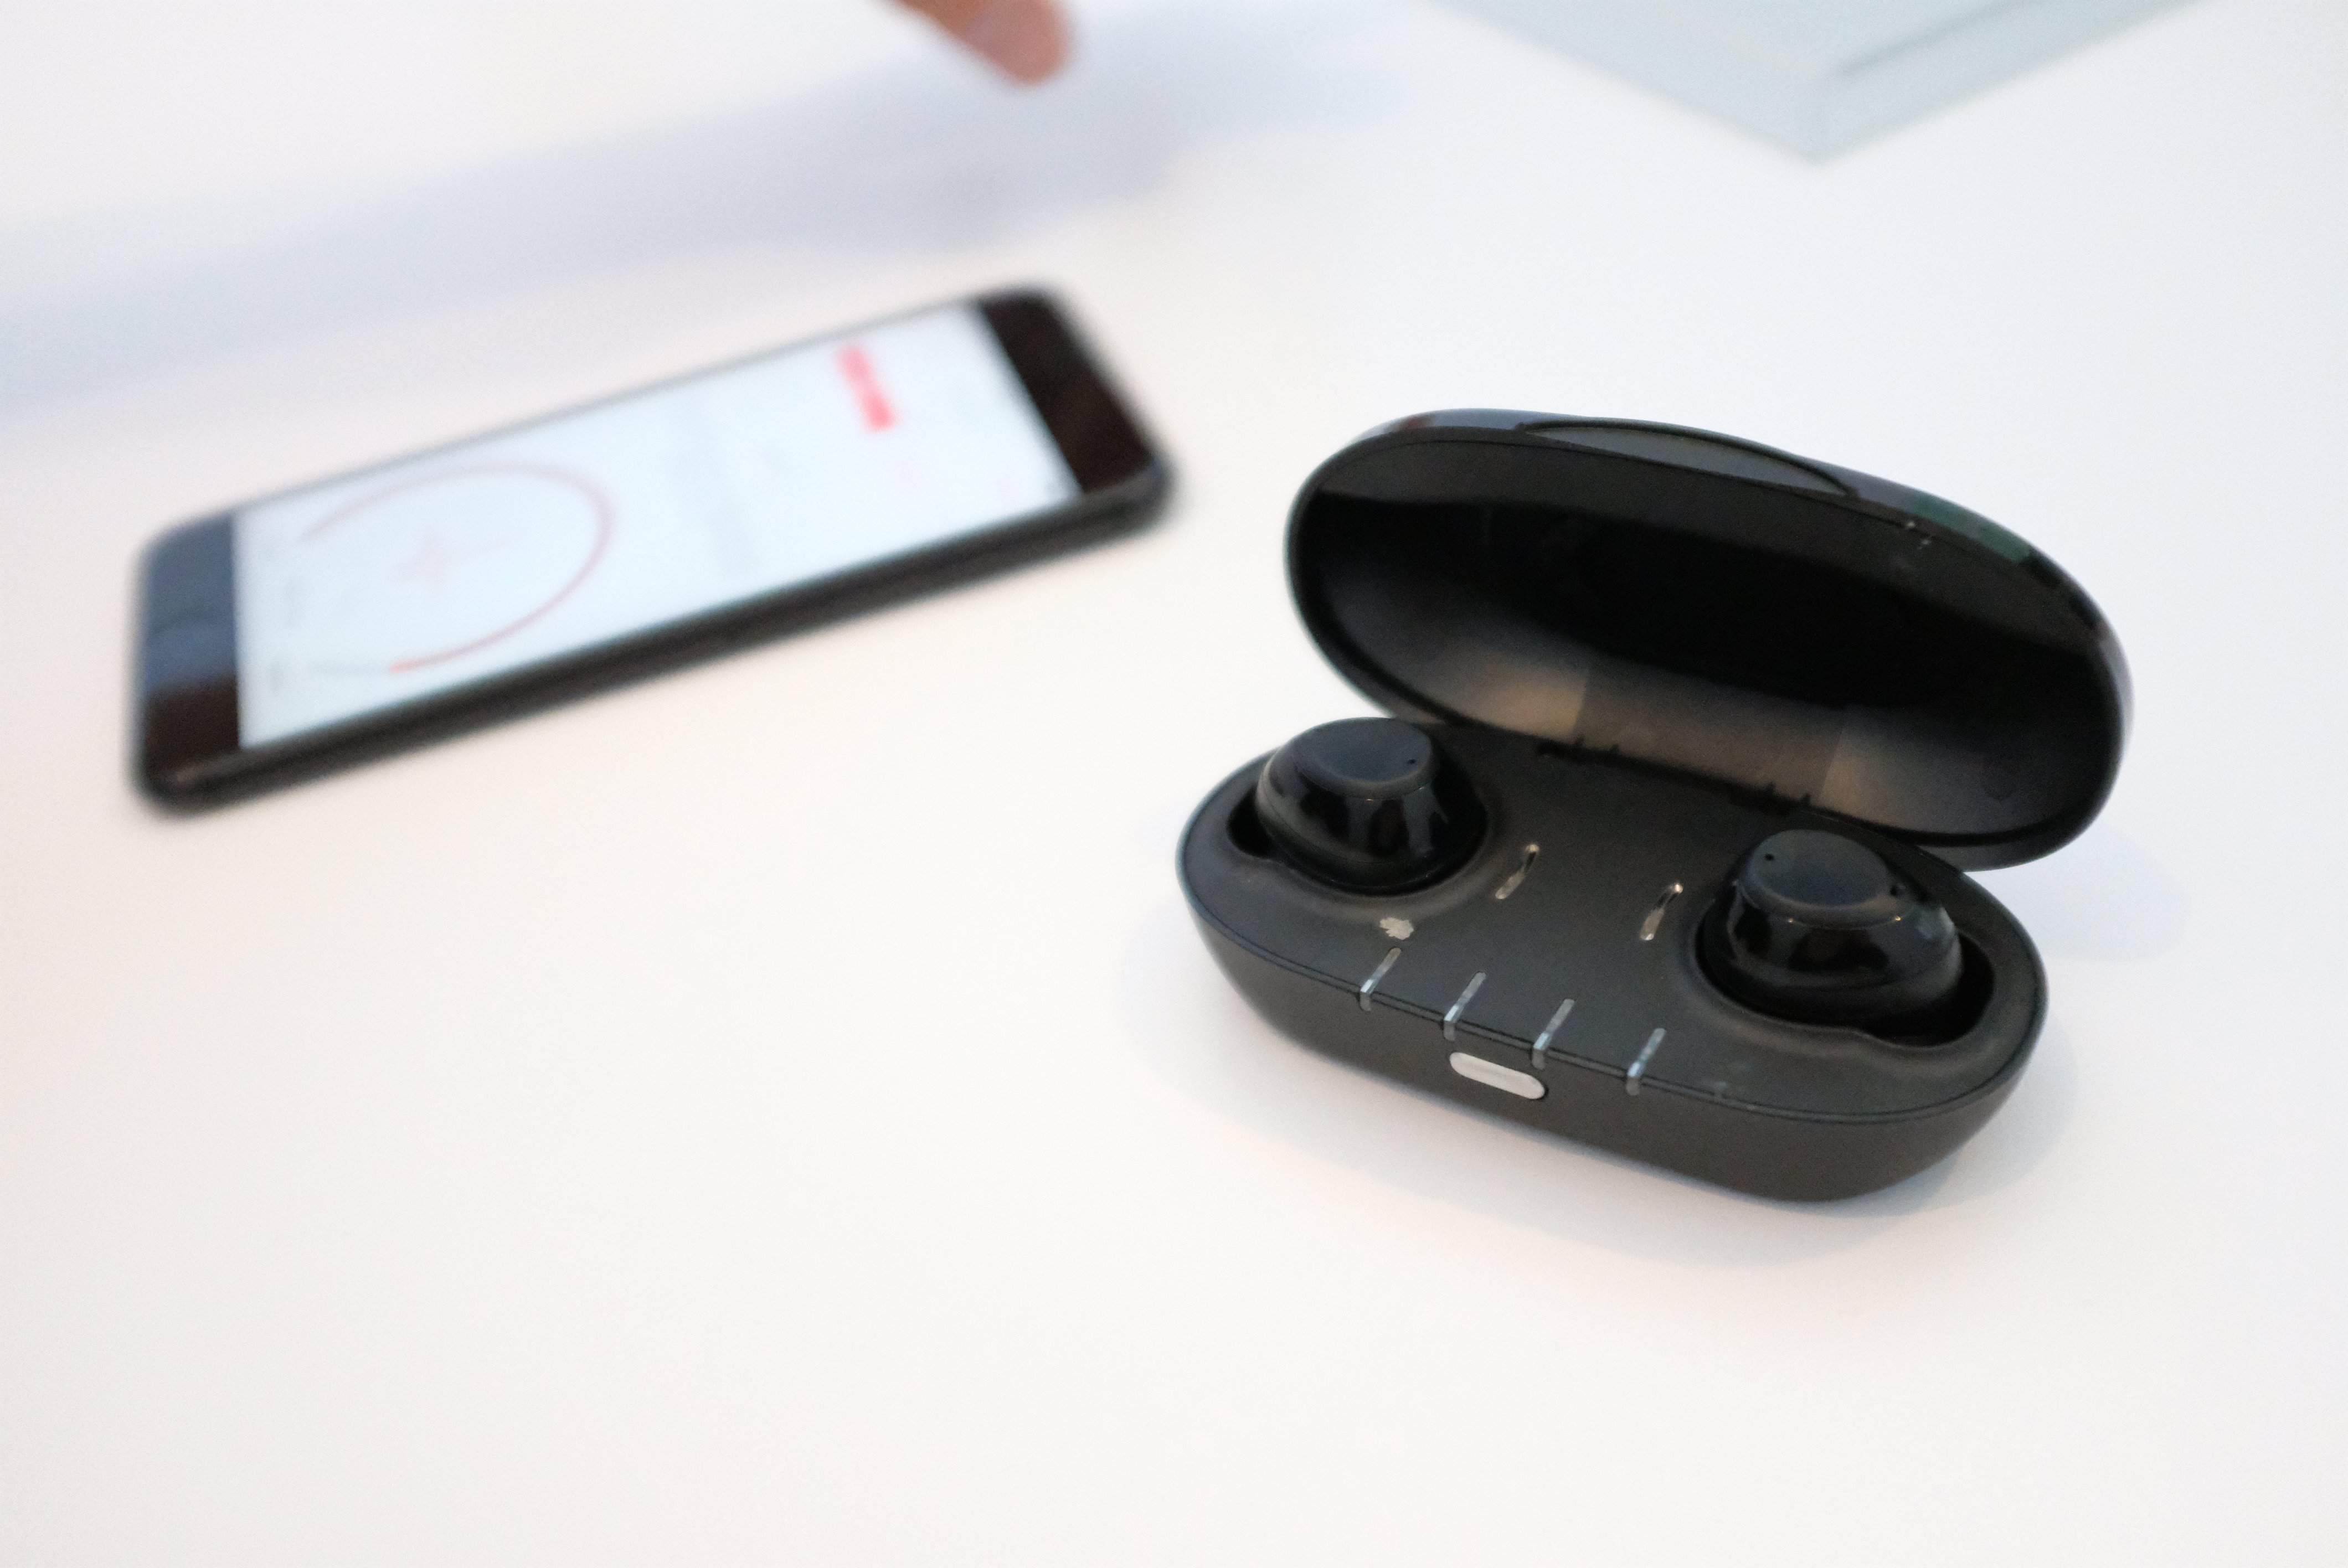 Nuheara’s voice amplifying earbuds offer customizable hearing profiles